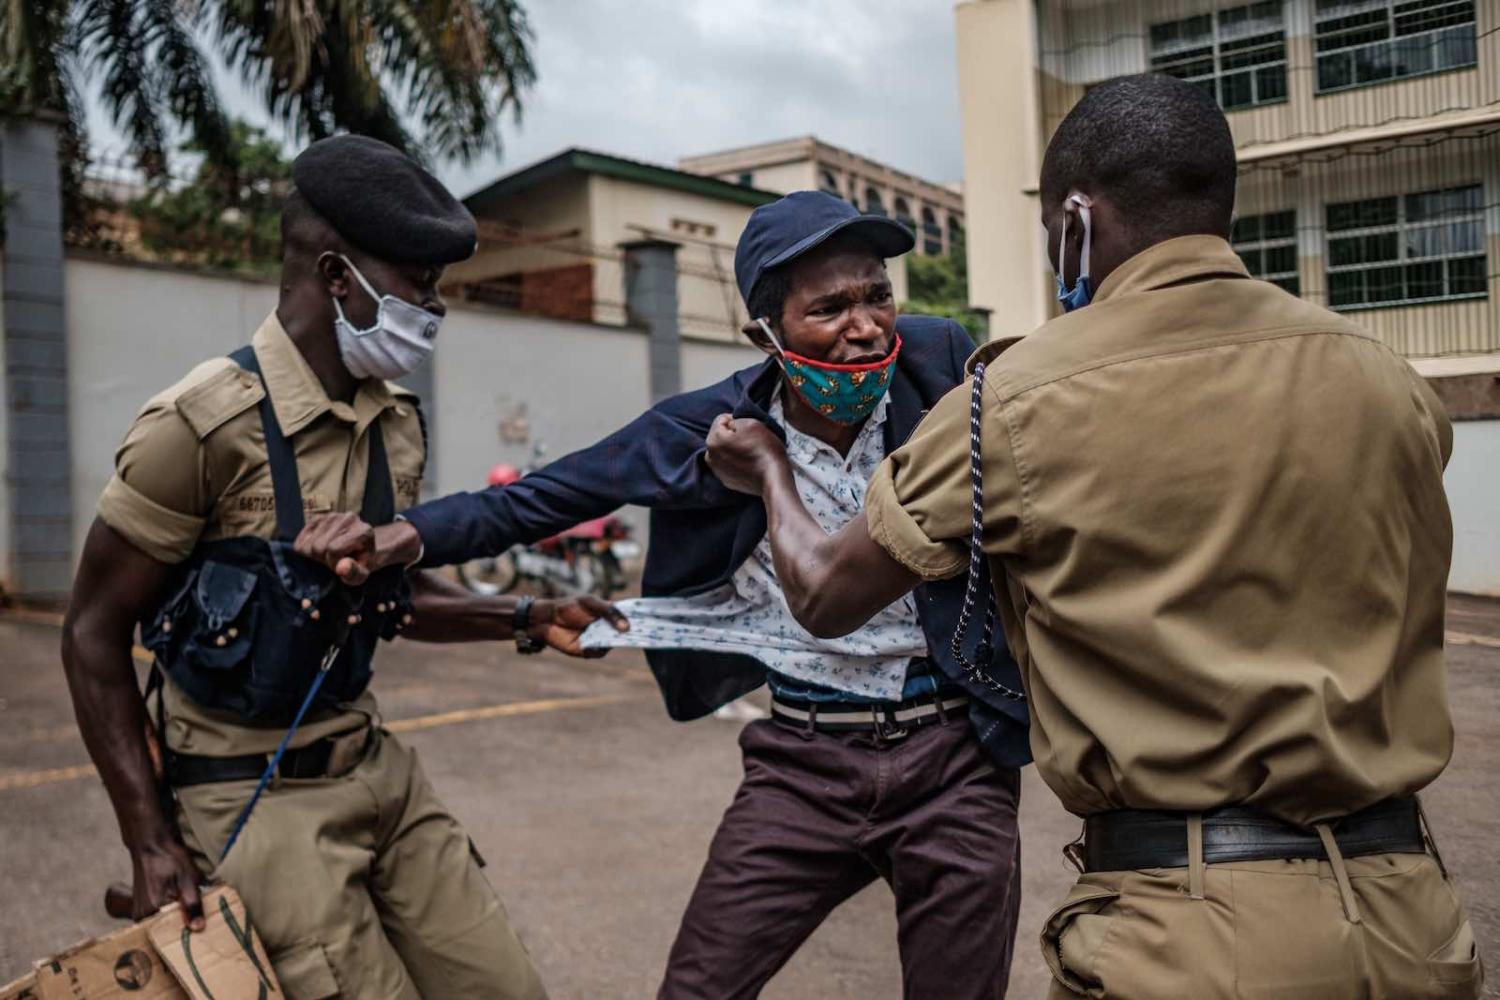 A demonstrator is arrested by police at a protest for more government food distributions during the Covid-19 crisis, 18 May in Kampala, Uganda (Sumy Sadurni/AFP via Getty Images)